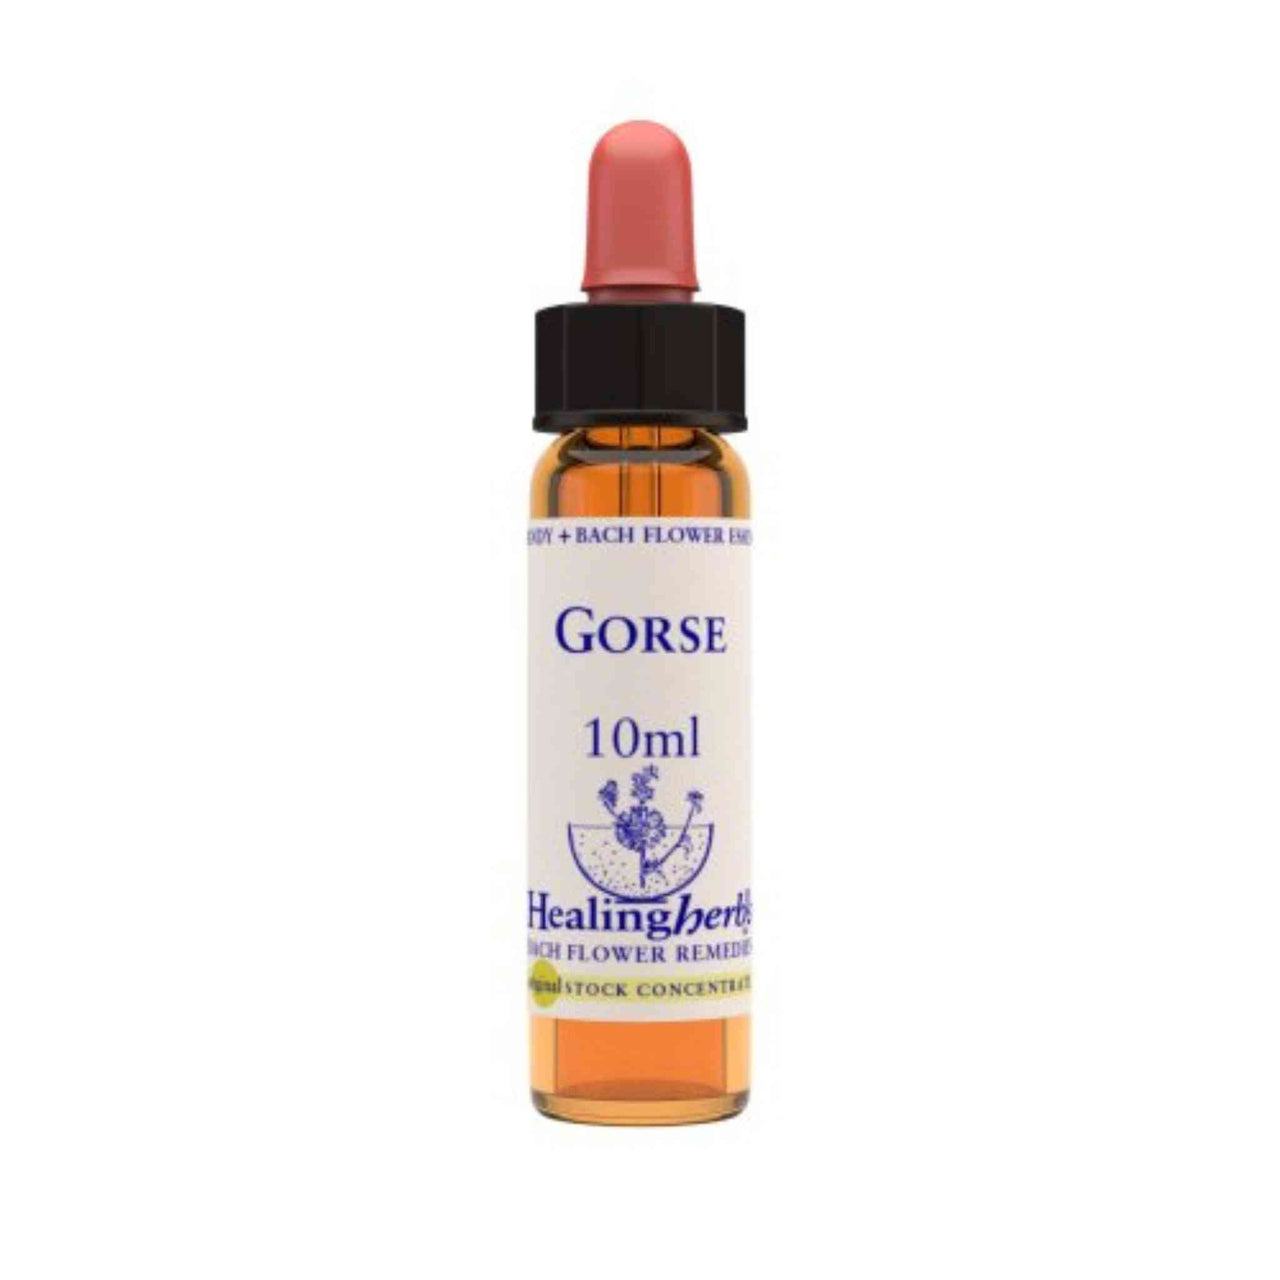 Vior Naturals - Gorse | Bach Flower Stock concentrate